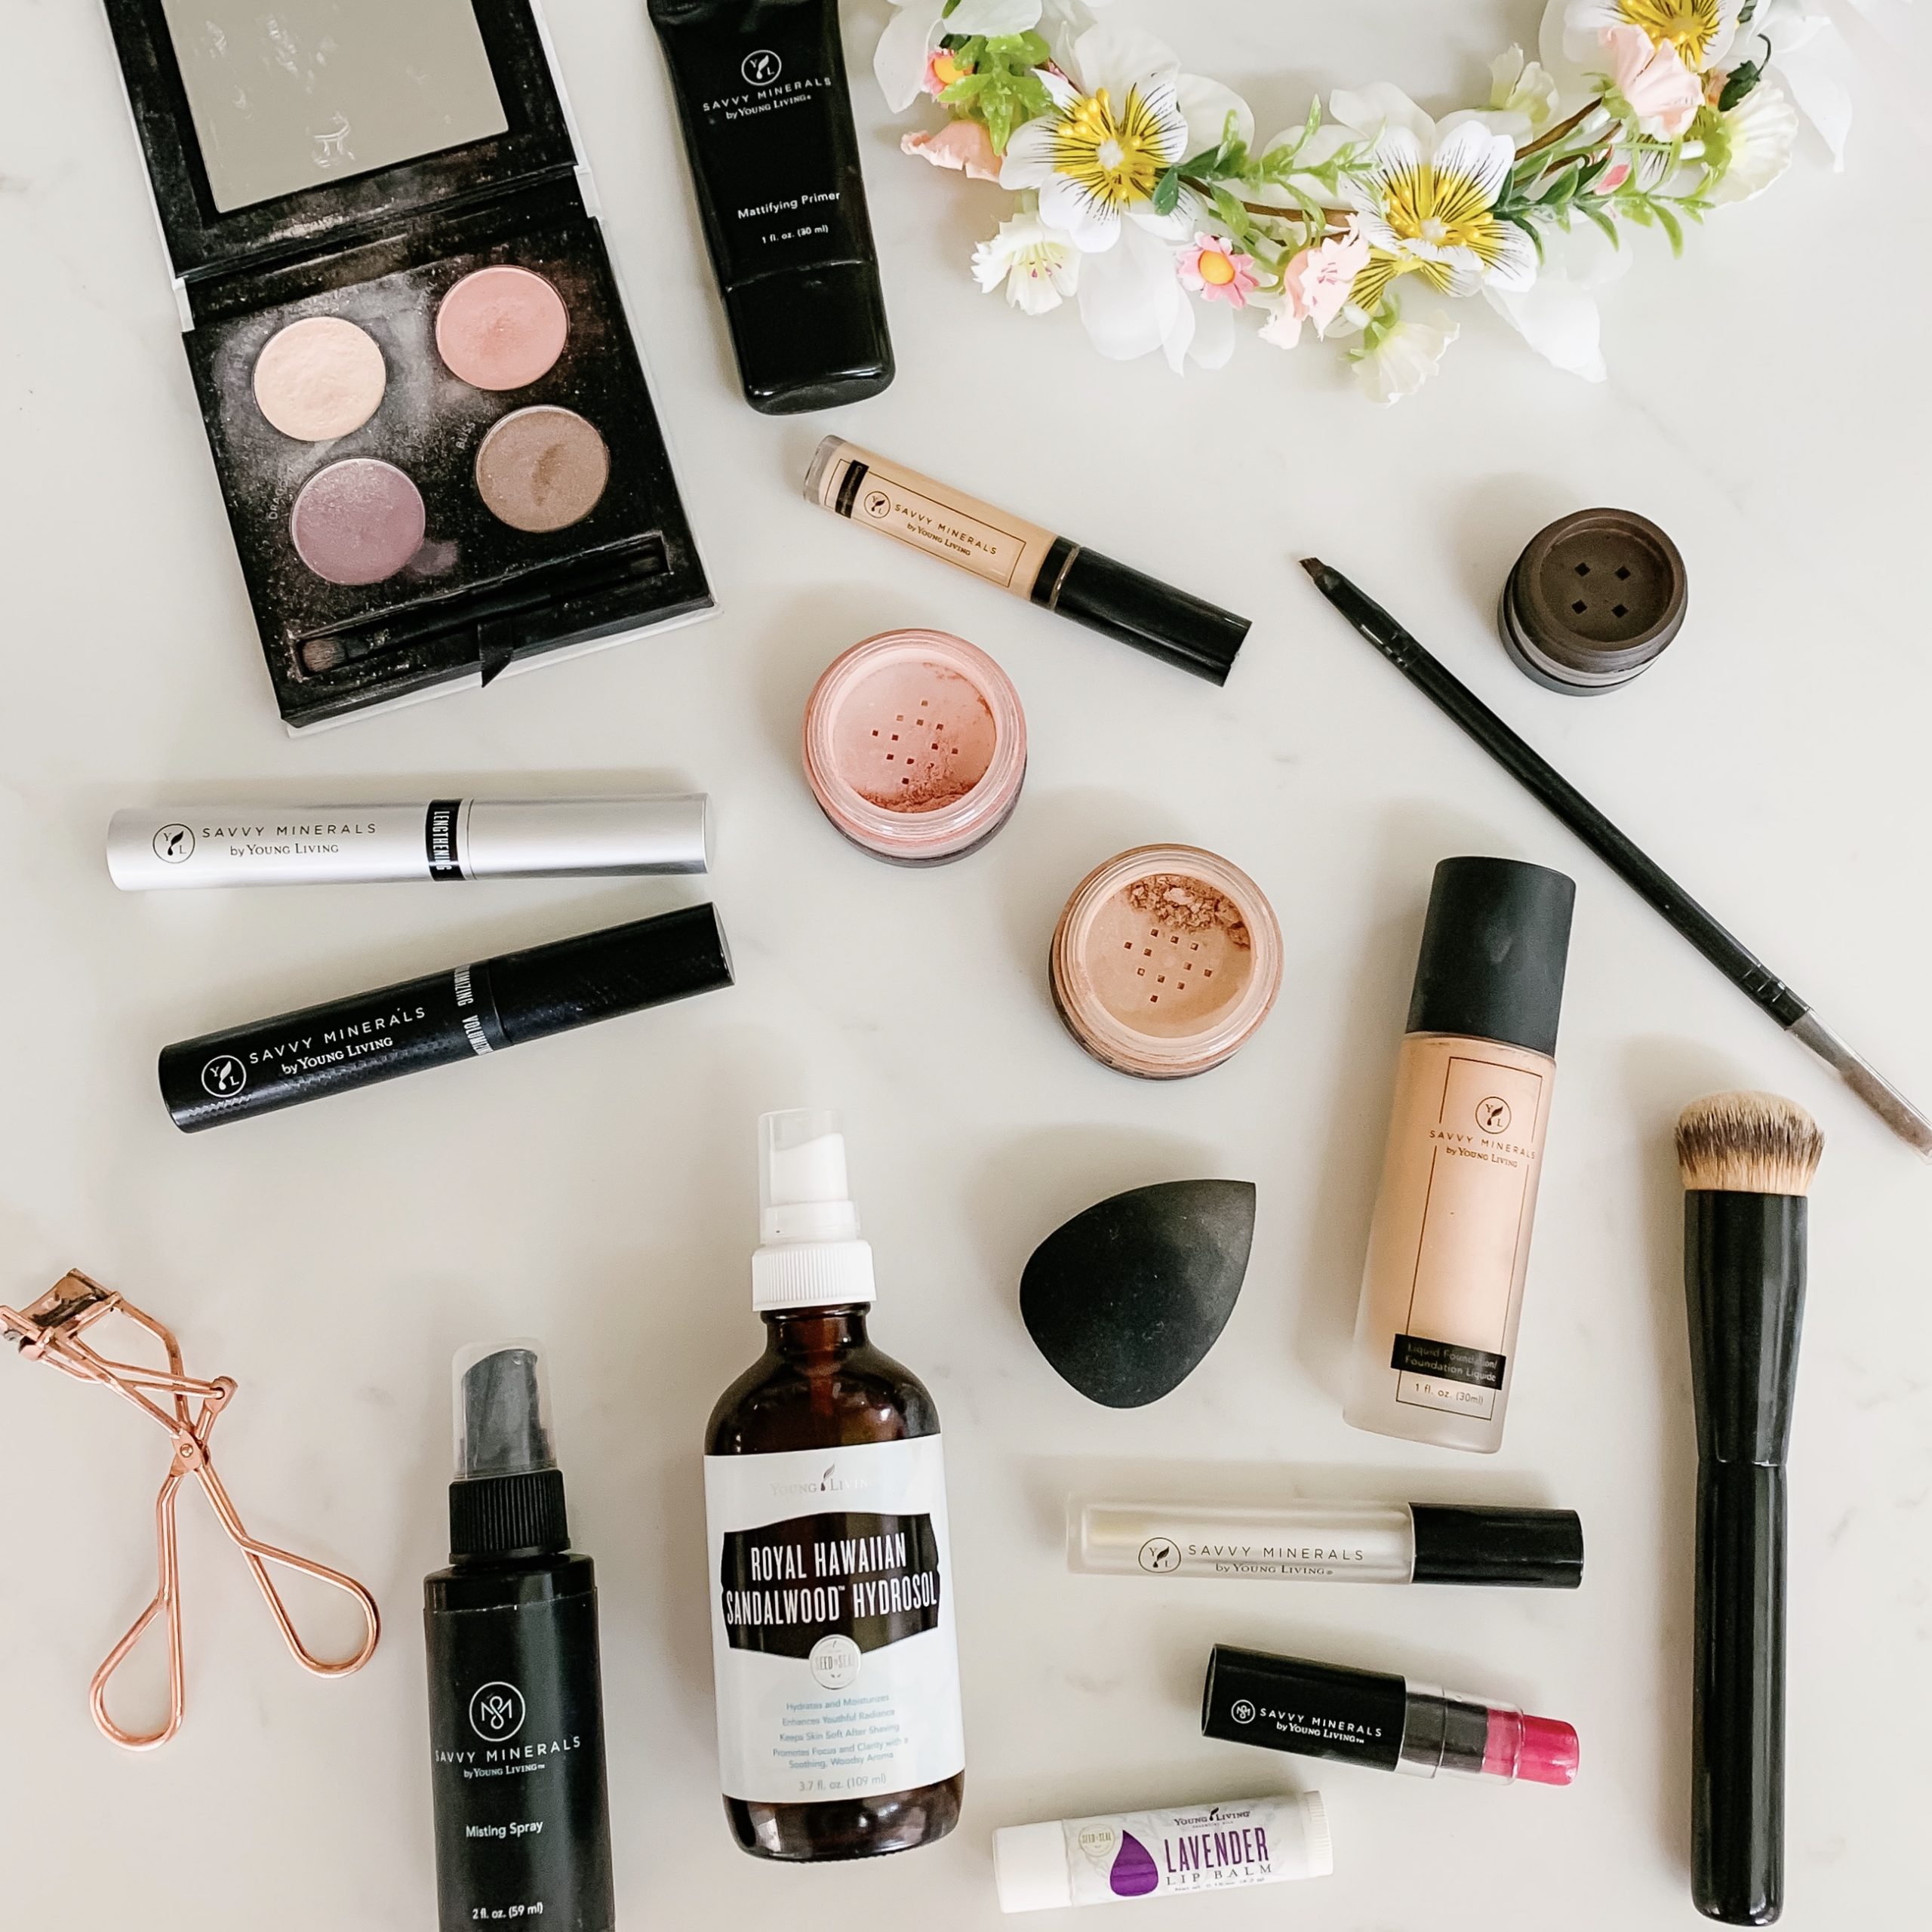 The ultimate clean makeup products! Full face of non-toxic beauty.